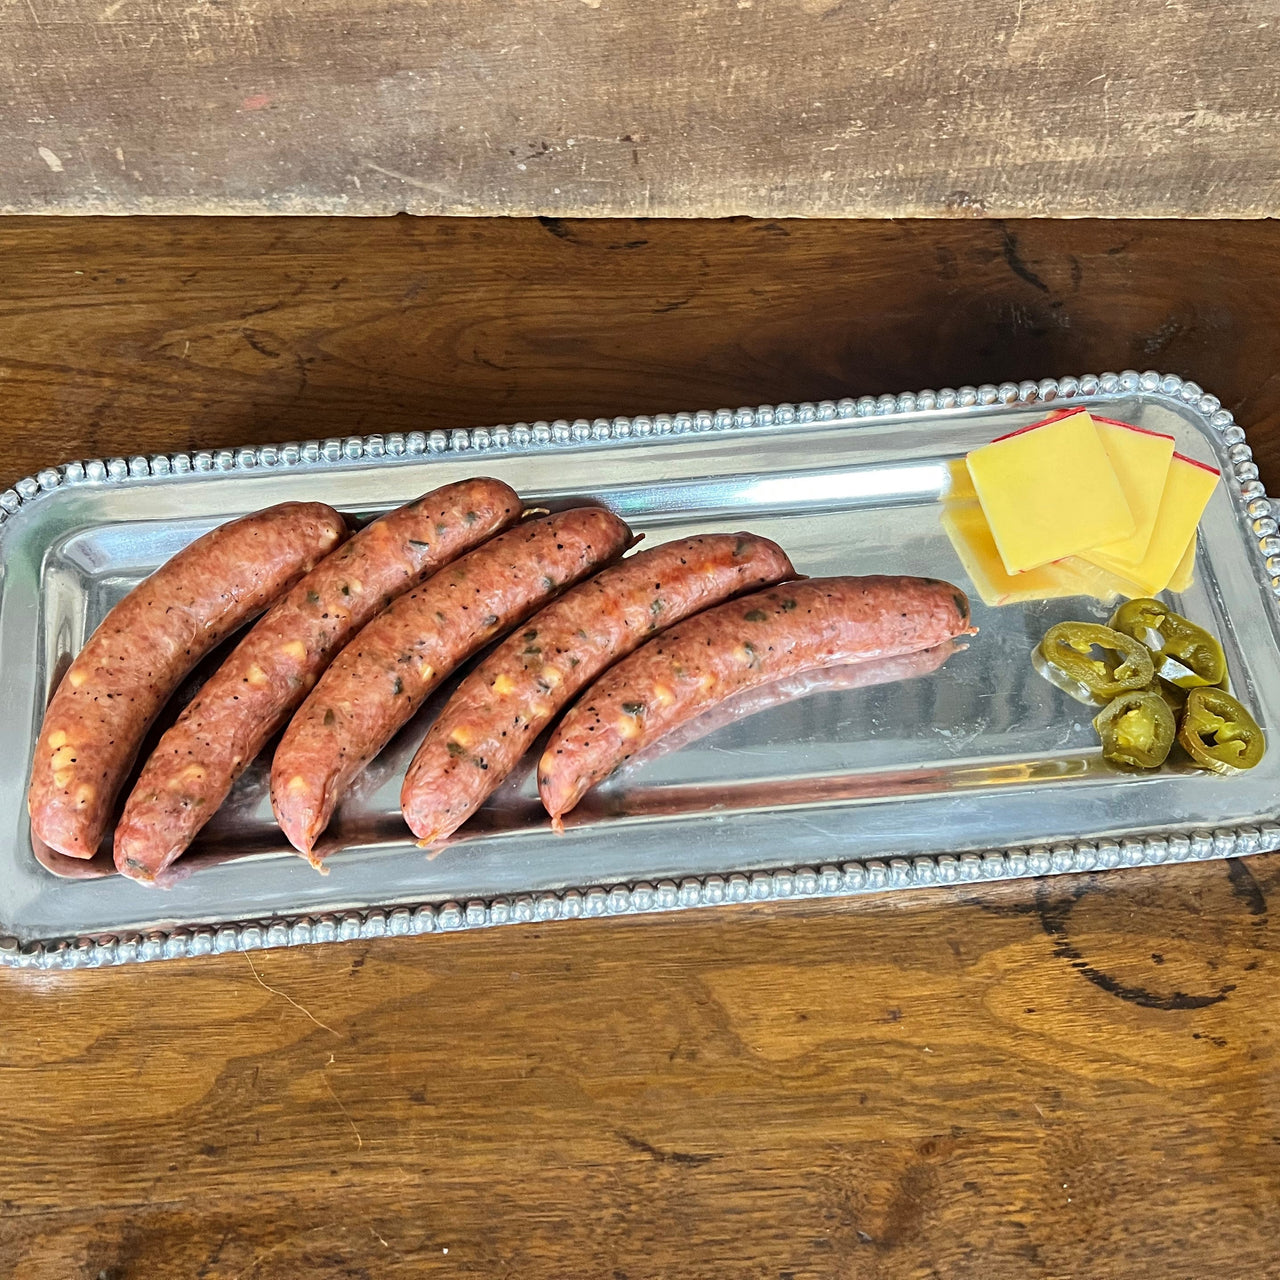 Our Award-Winning Gouda Jalapeno Sausage is a favorite of all who taste it.  Just the right amount of Gouda Cheese and the spice of dried jalapenos make this sausage a great taste by itself or with any side of your choice.  Item #713E  16 oz. Package